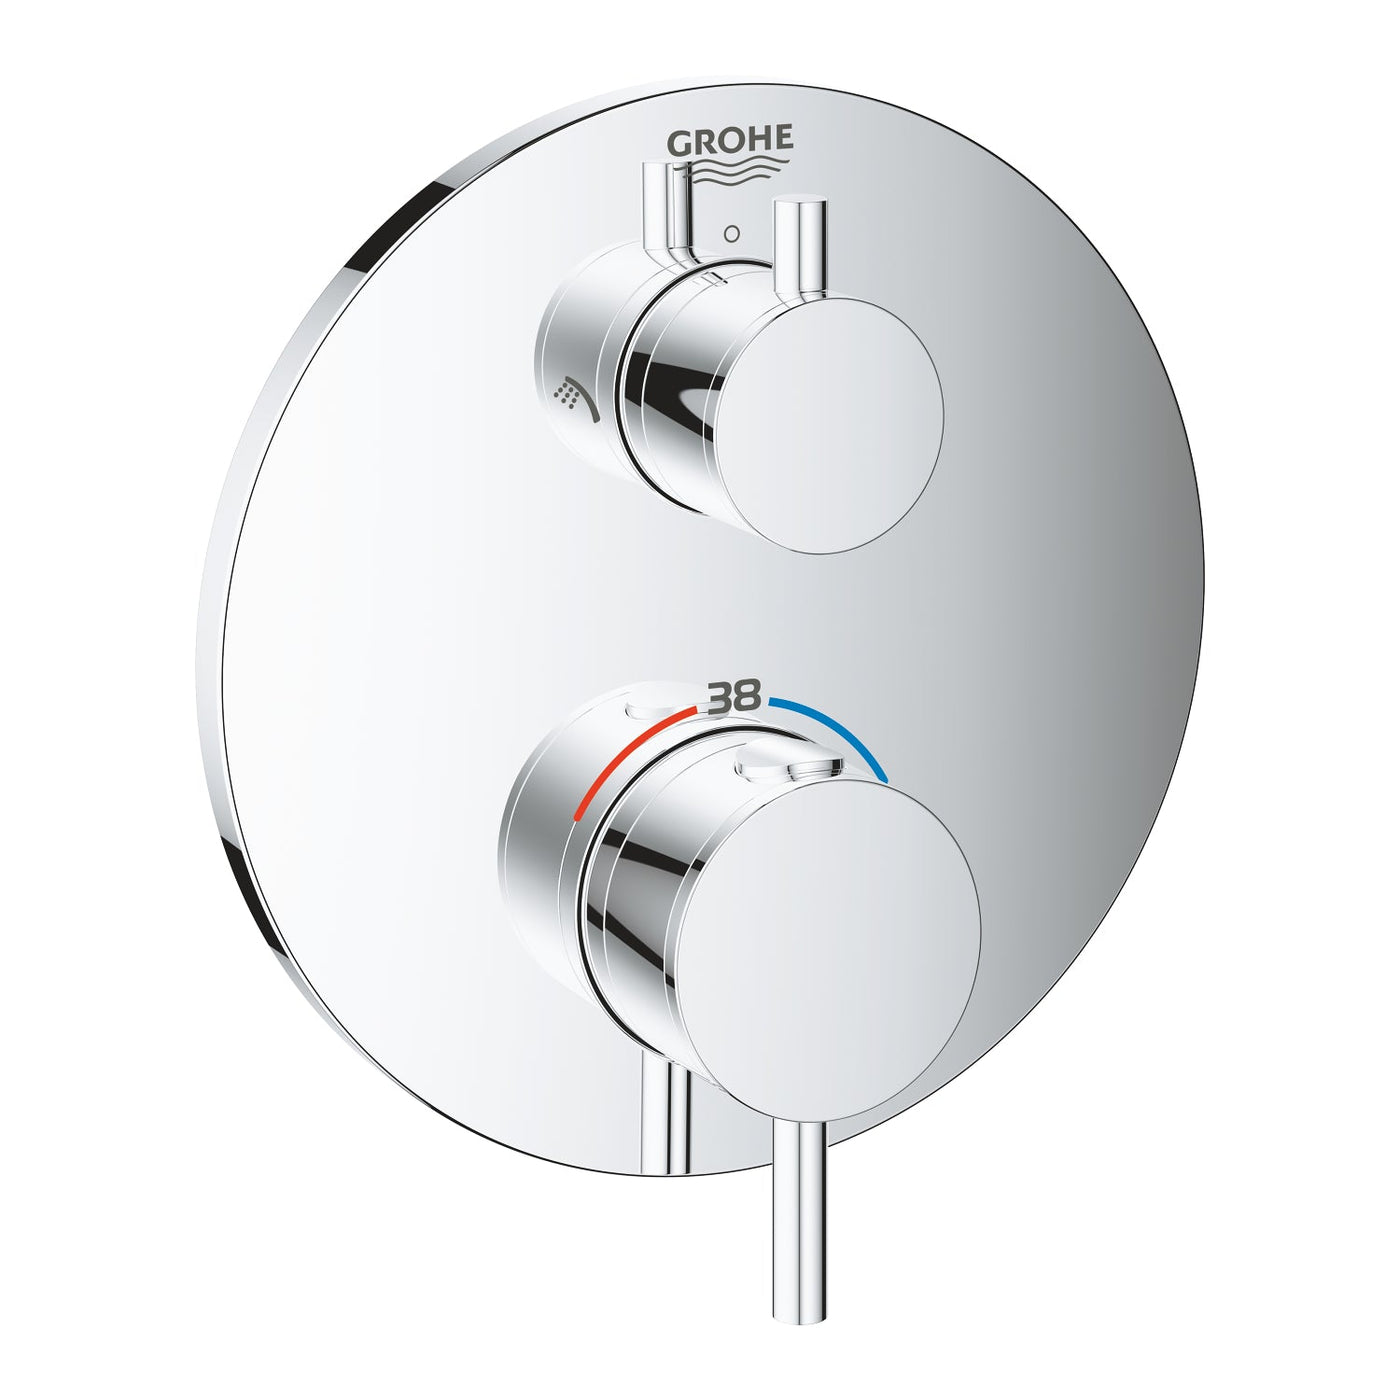 Grohe Chrome Atrio Thermostatic shower mixer for 2 outlets with integrated shut off/diverter valve - Letta London - Twin Valves With Diverter